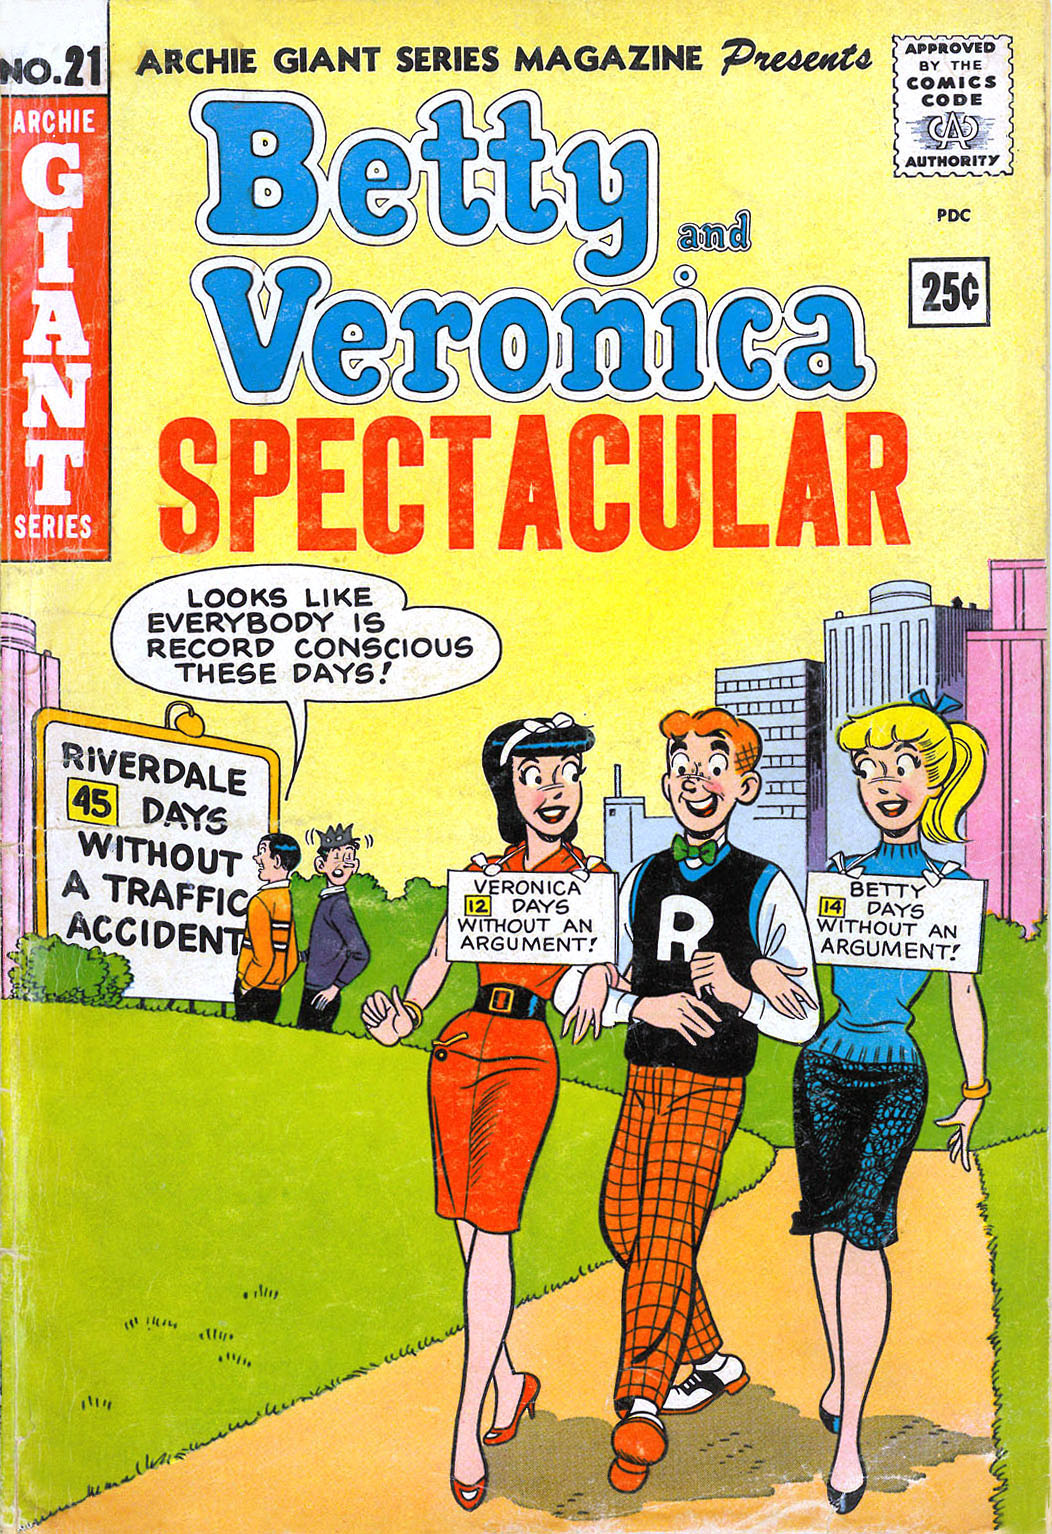 Read online Archie Giant Series Magazine comic -  Issue #21 - 1